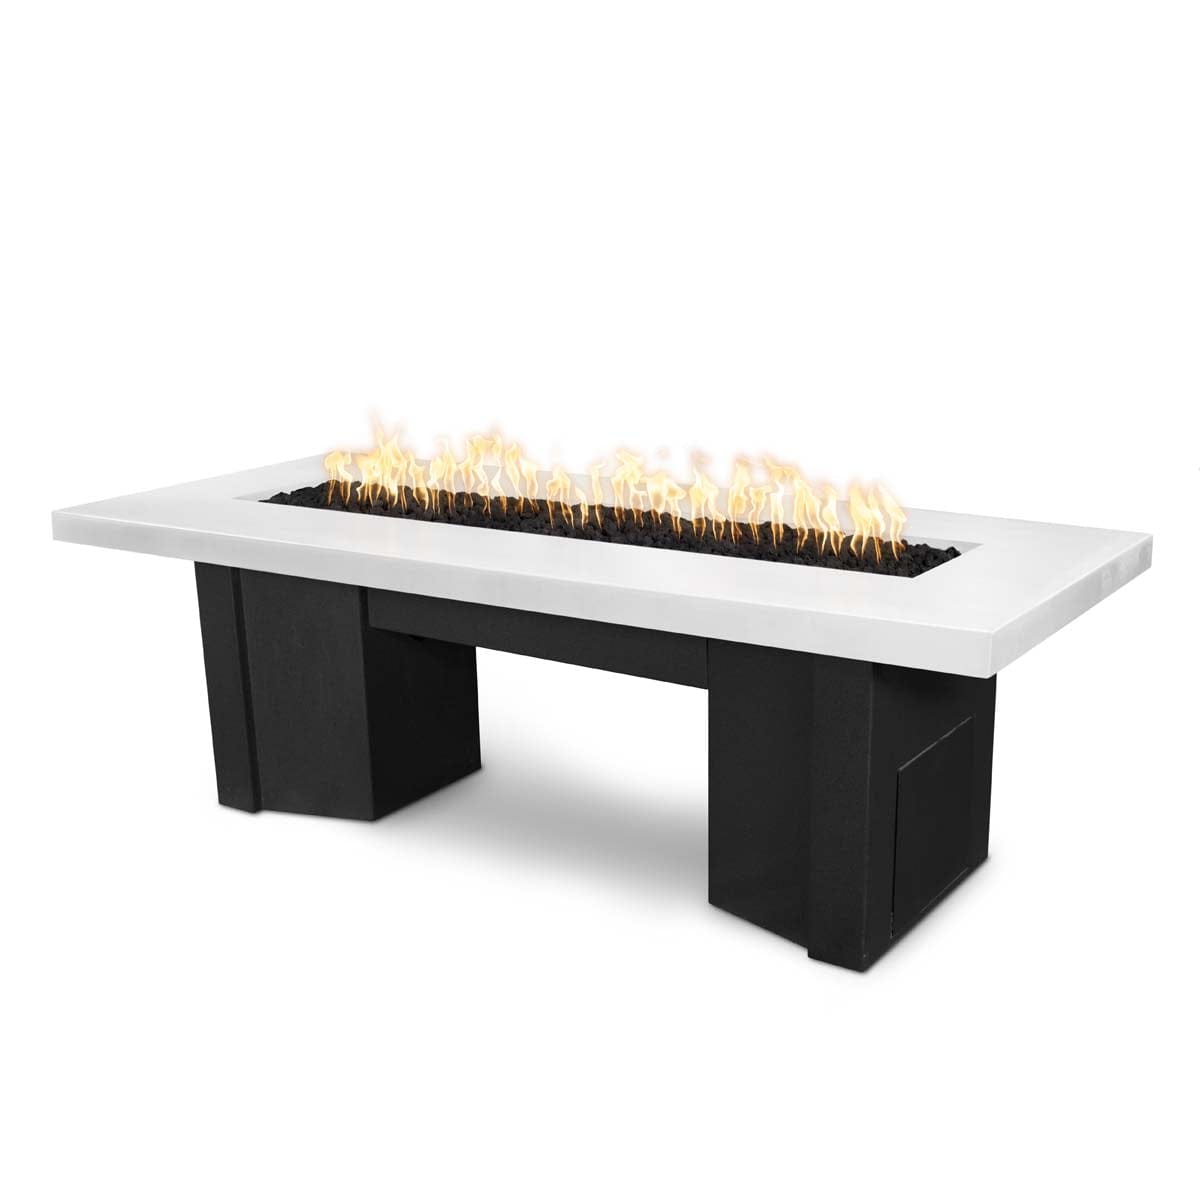 The Outdoor Plus Fire Features Limestone (-LIM) / Black Powder Coated Steel (-BLK) The Outdoor Plus 78&quot; Alameda Fire Table Smooth Concrete in Liquid Propane - Flame Sense System with Push Button Spark Igniter / OPT-ALMGFRC78FSEN-LP